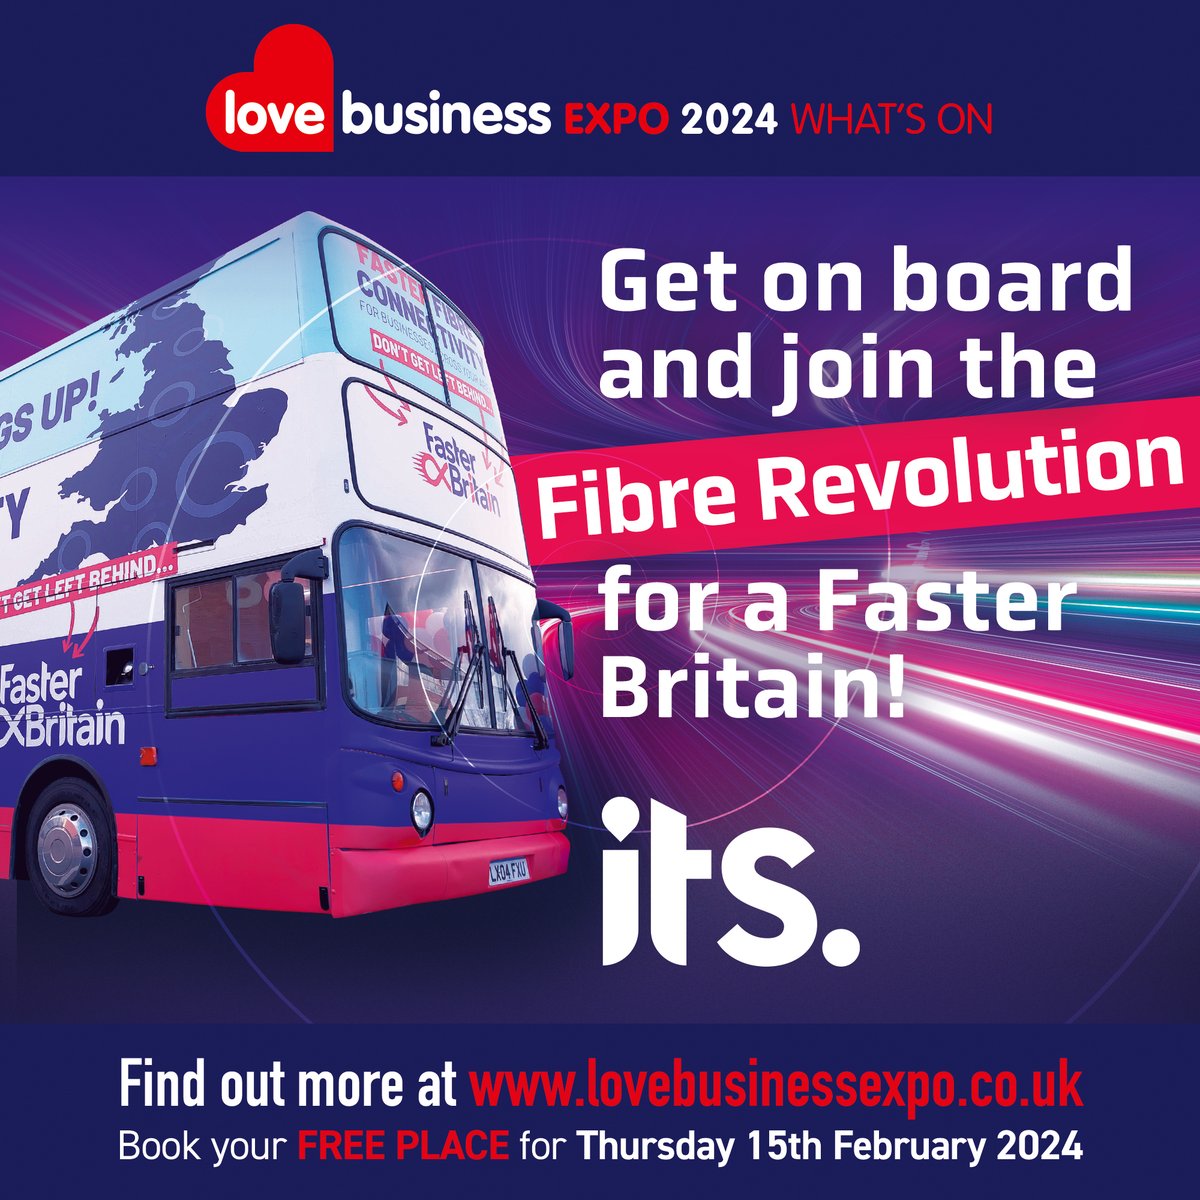 Get on board and join the Fibre Revolution for a Faster Britain at Love Business EXPO 2024! Thursday 15th February at Holywell Park Conference Centre in Loughborough. Book your FREE delegate ticket for Love Business EXPO 2024. lovebusinessexpo.co.uk #LoveBusinessEXPO